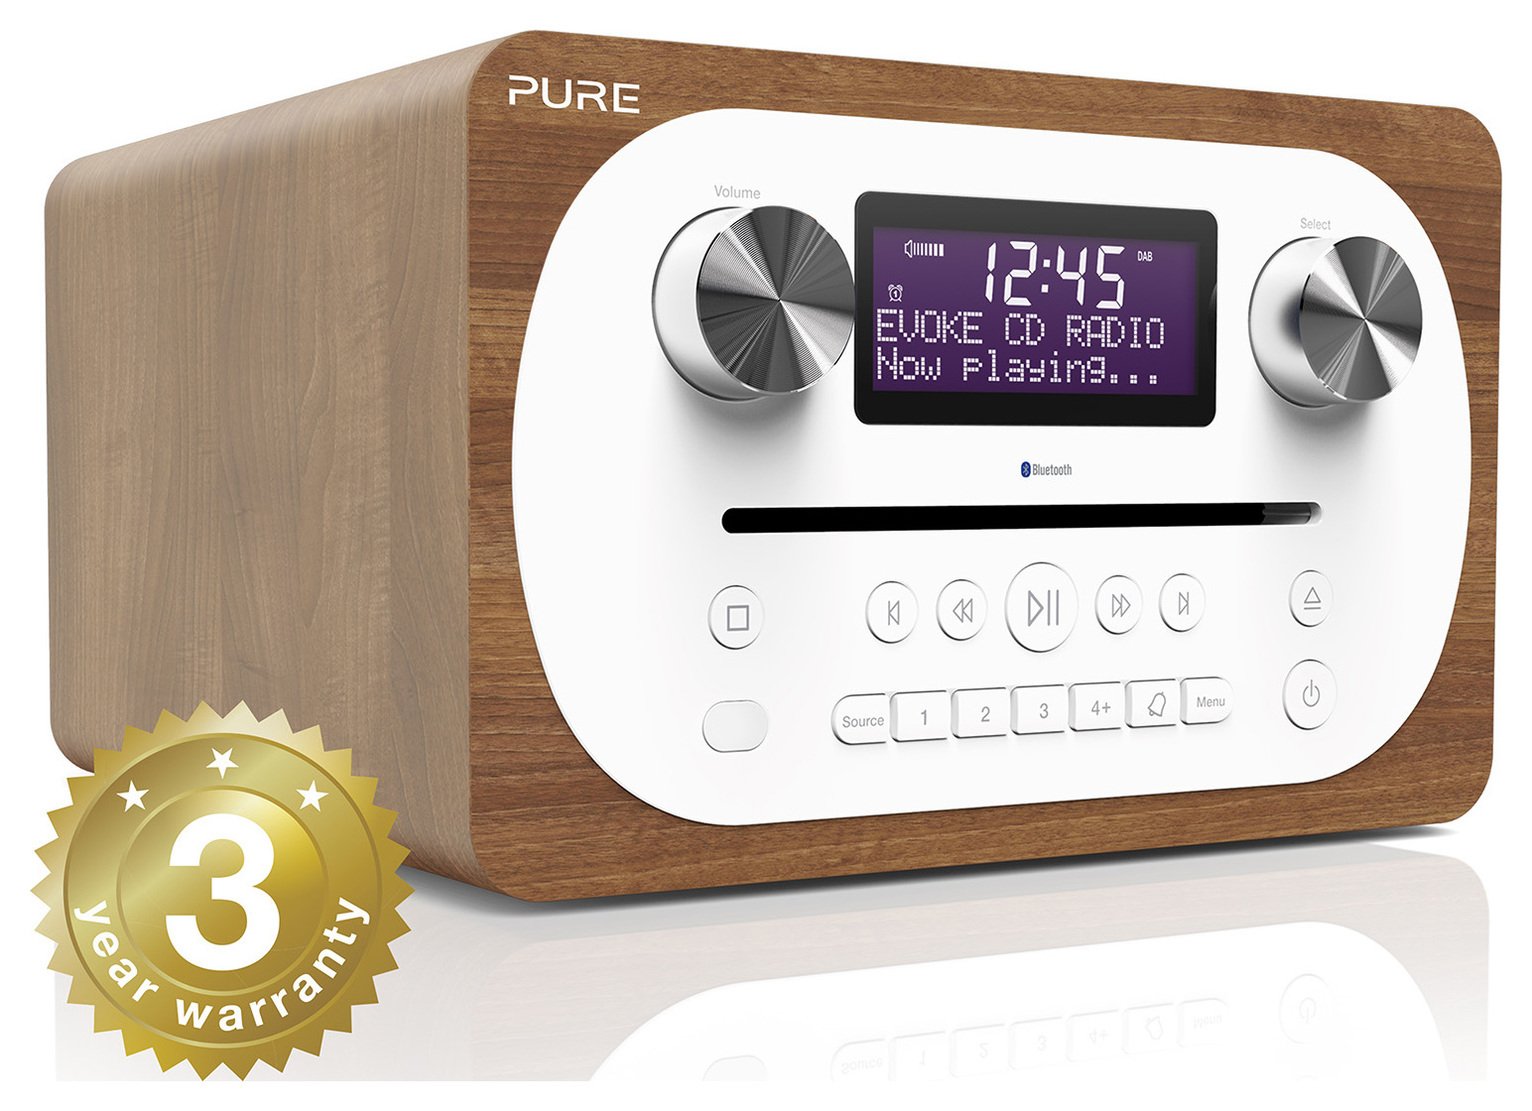 Pure Evoke C-D4 DAB+/FM with CD player and Bluetooth Review